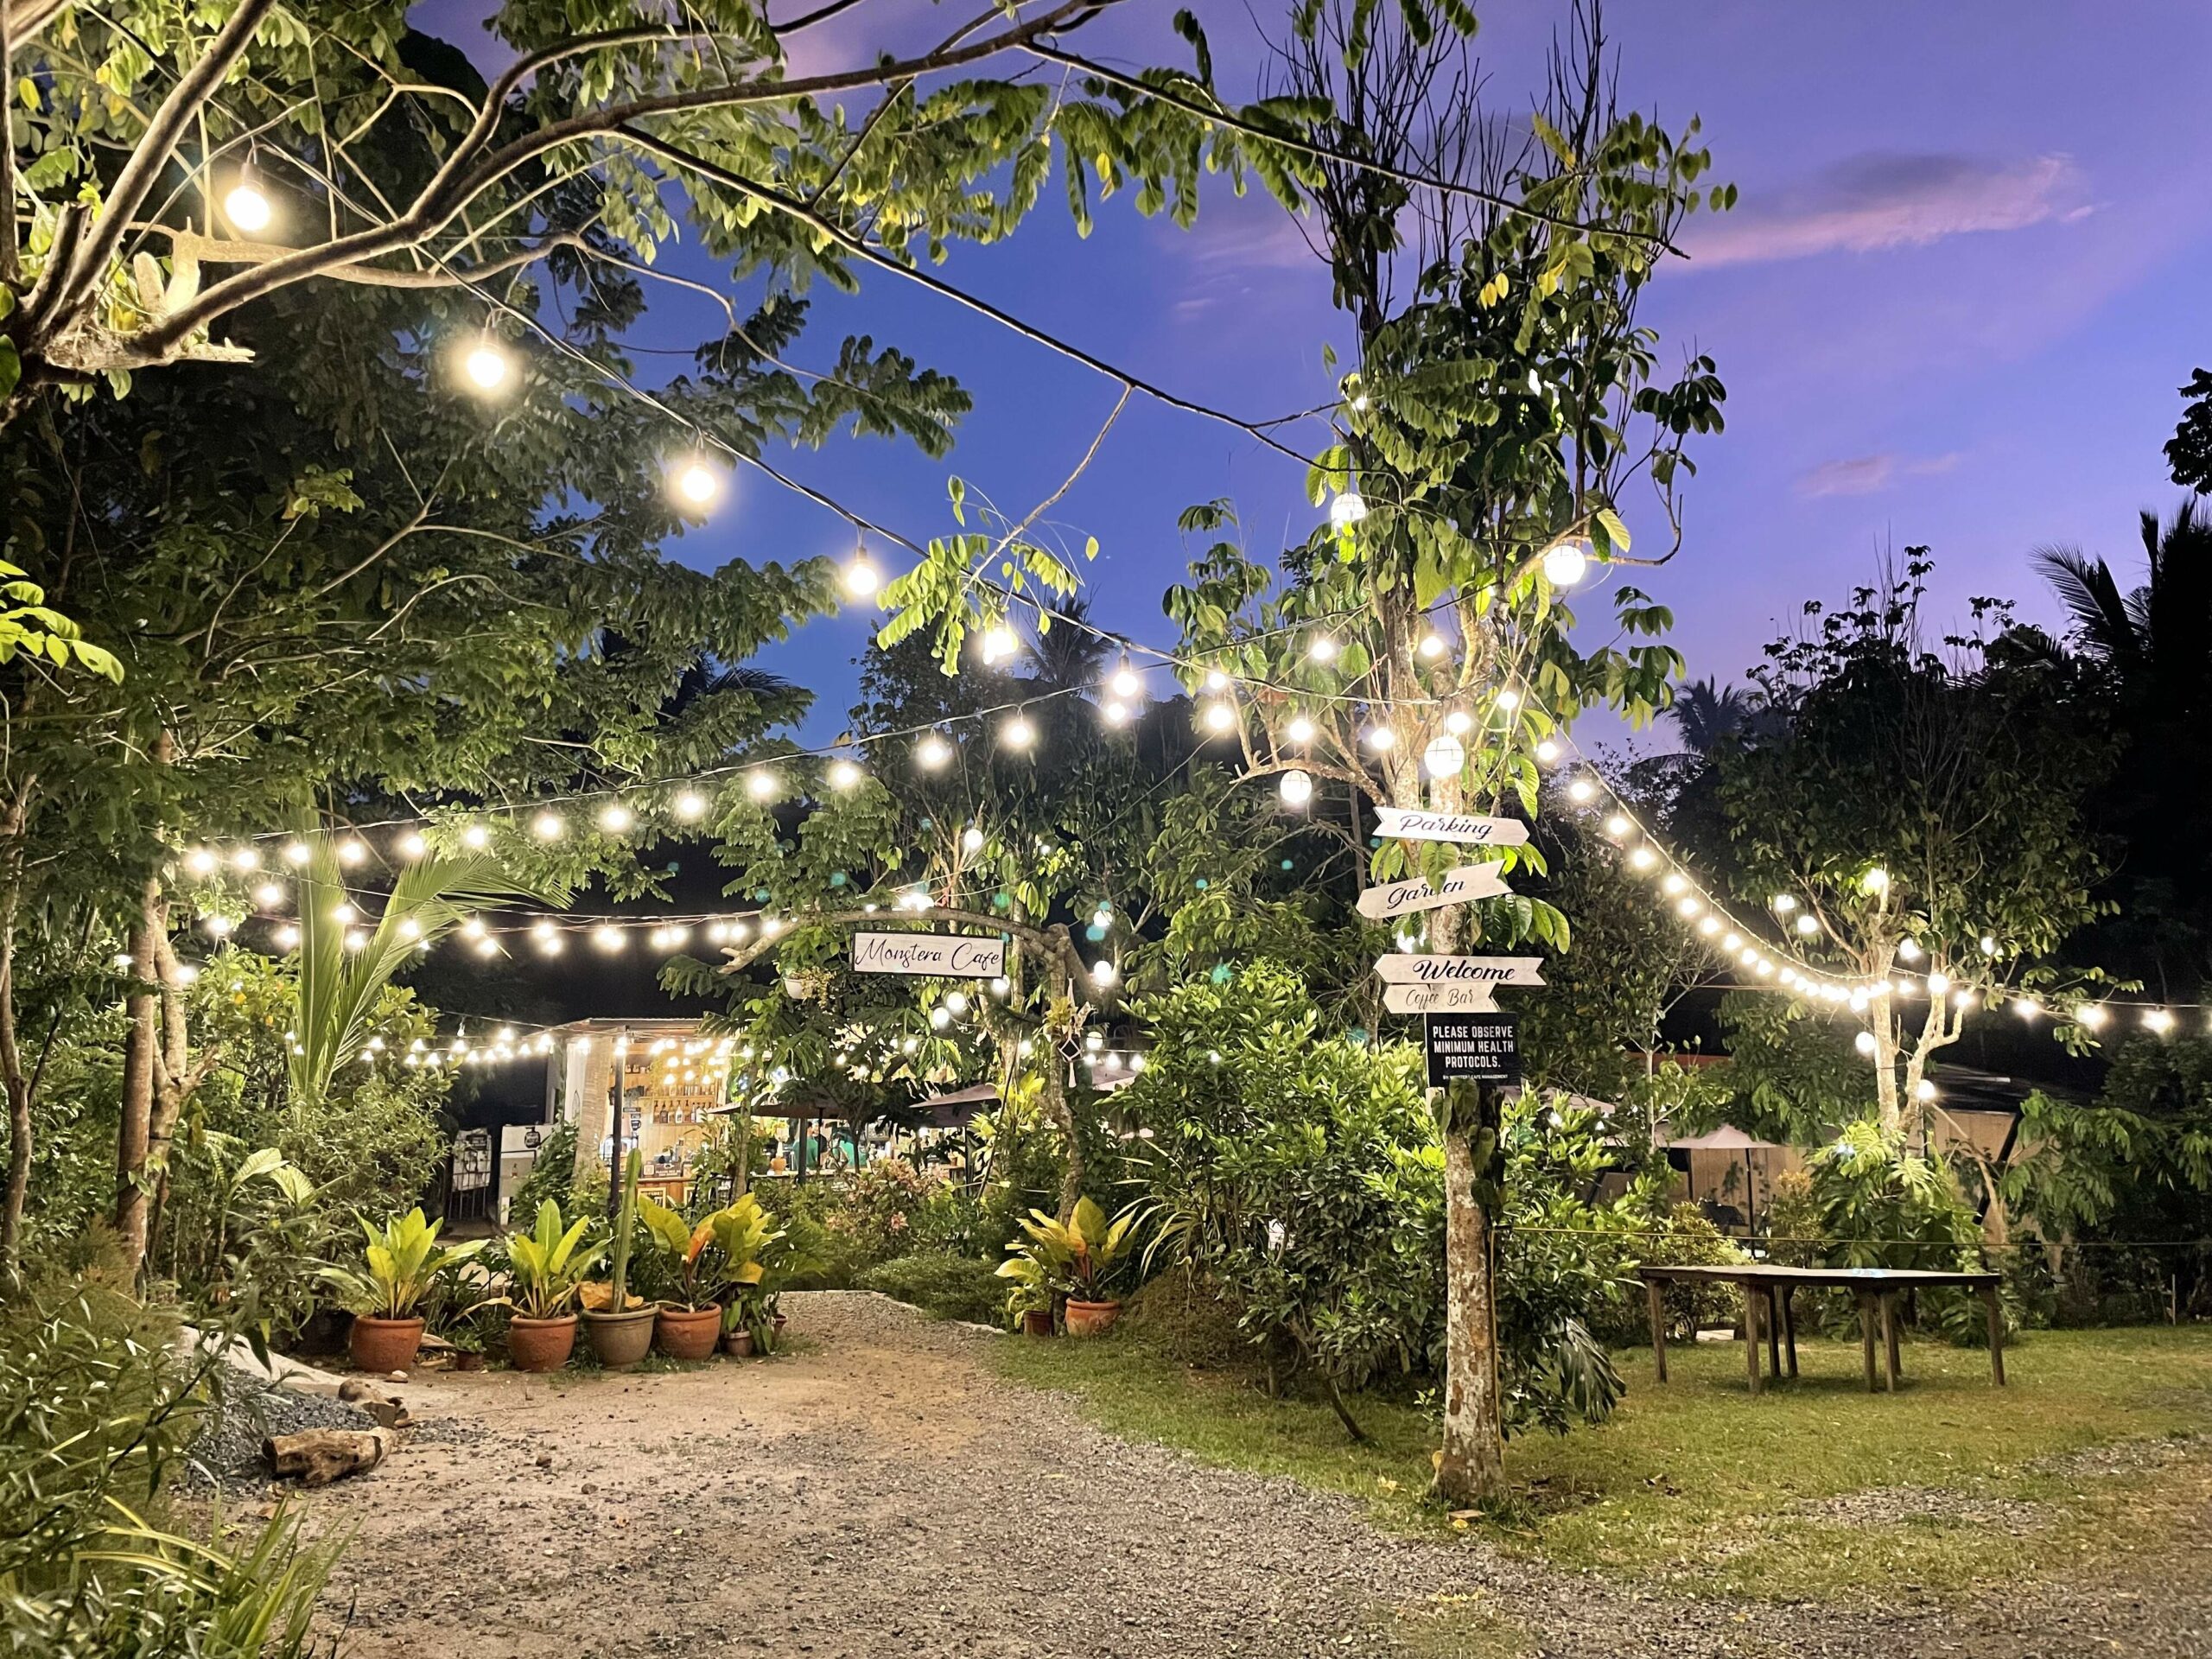 Monstera Cafe in Cavite - overall view